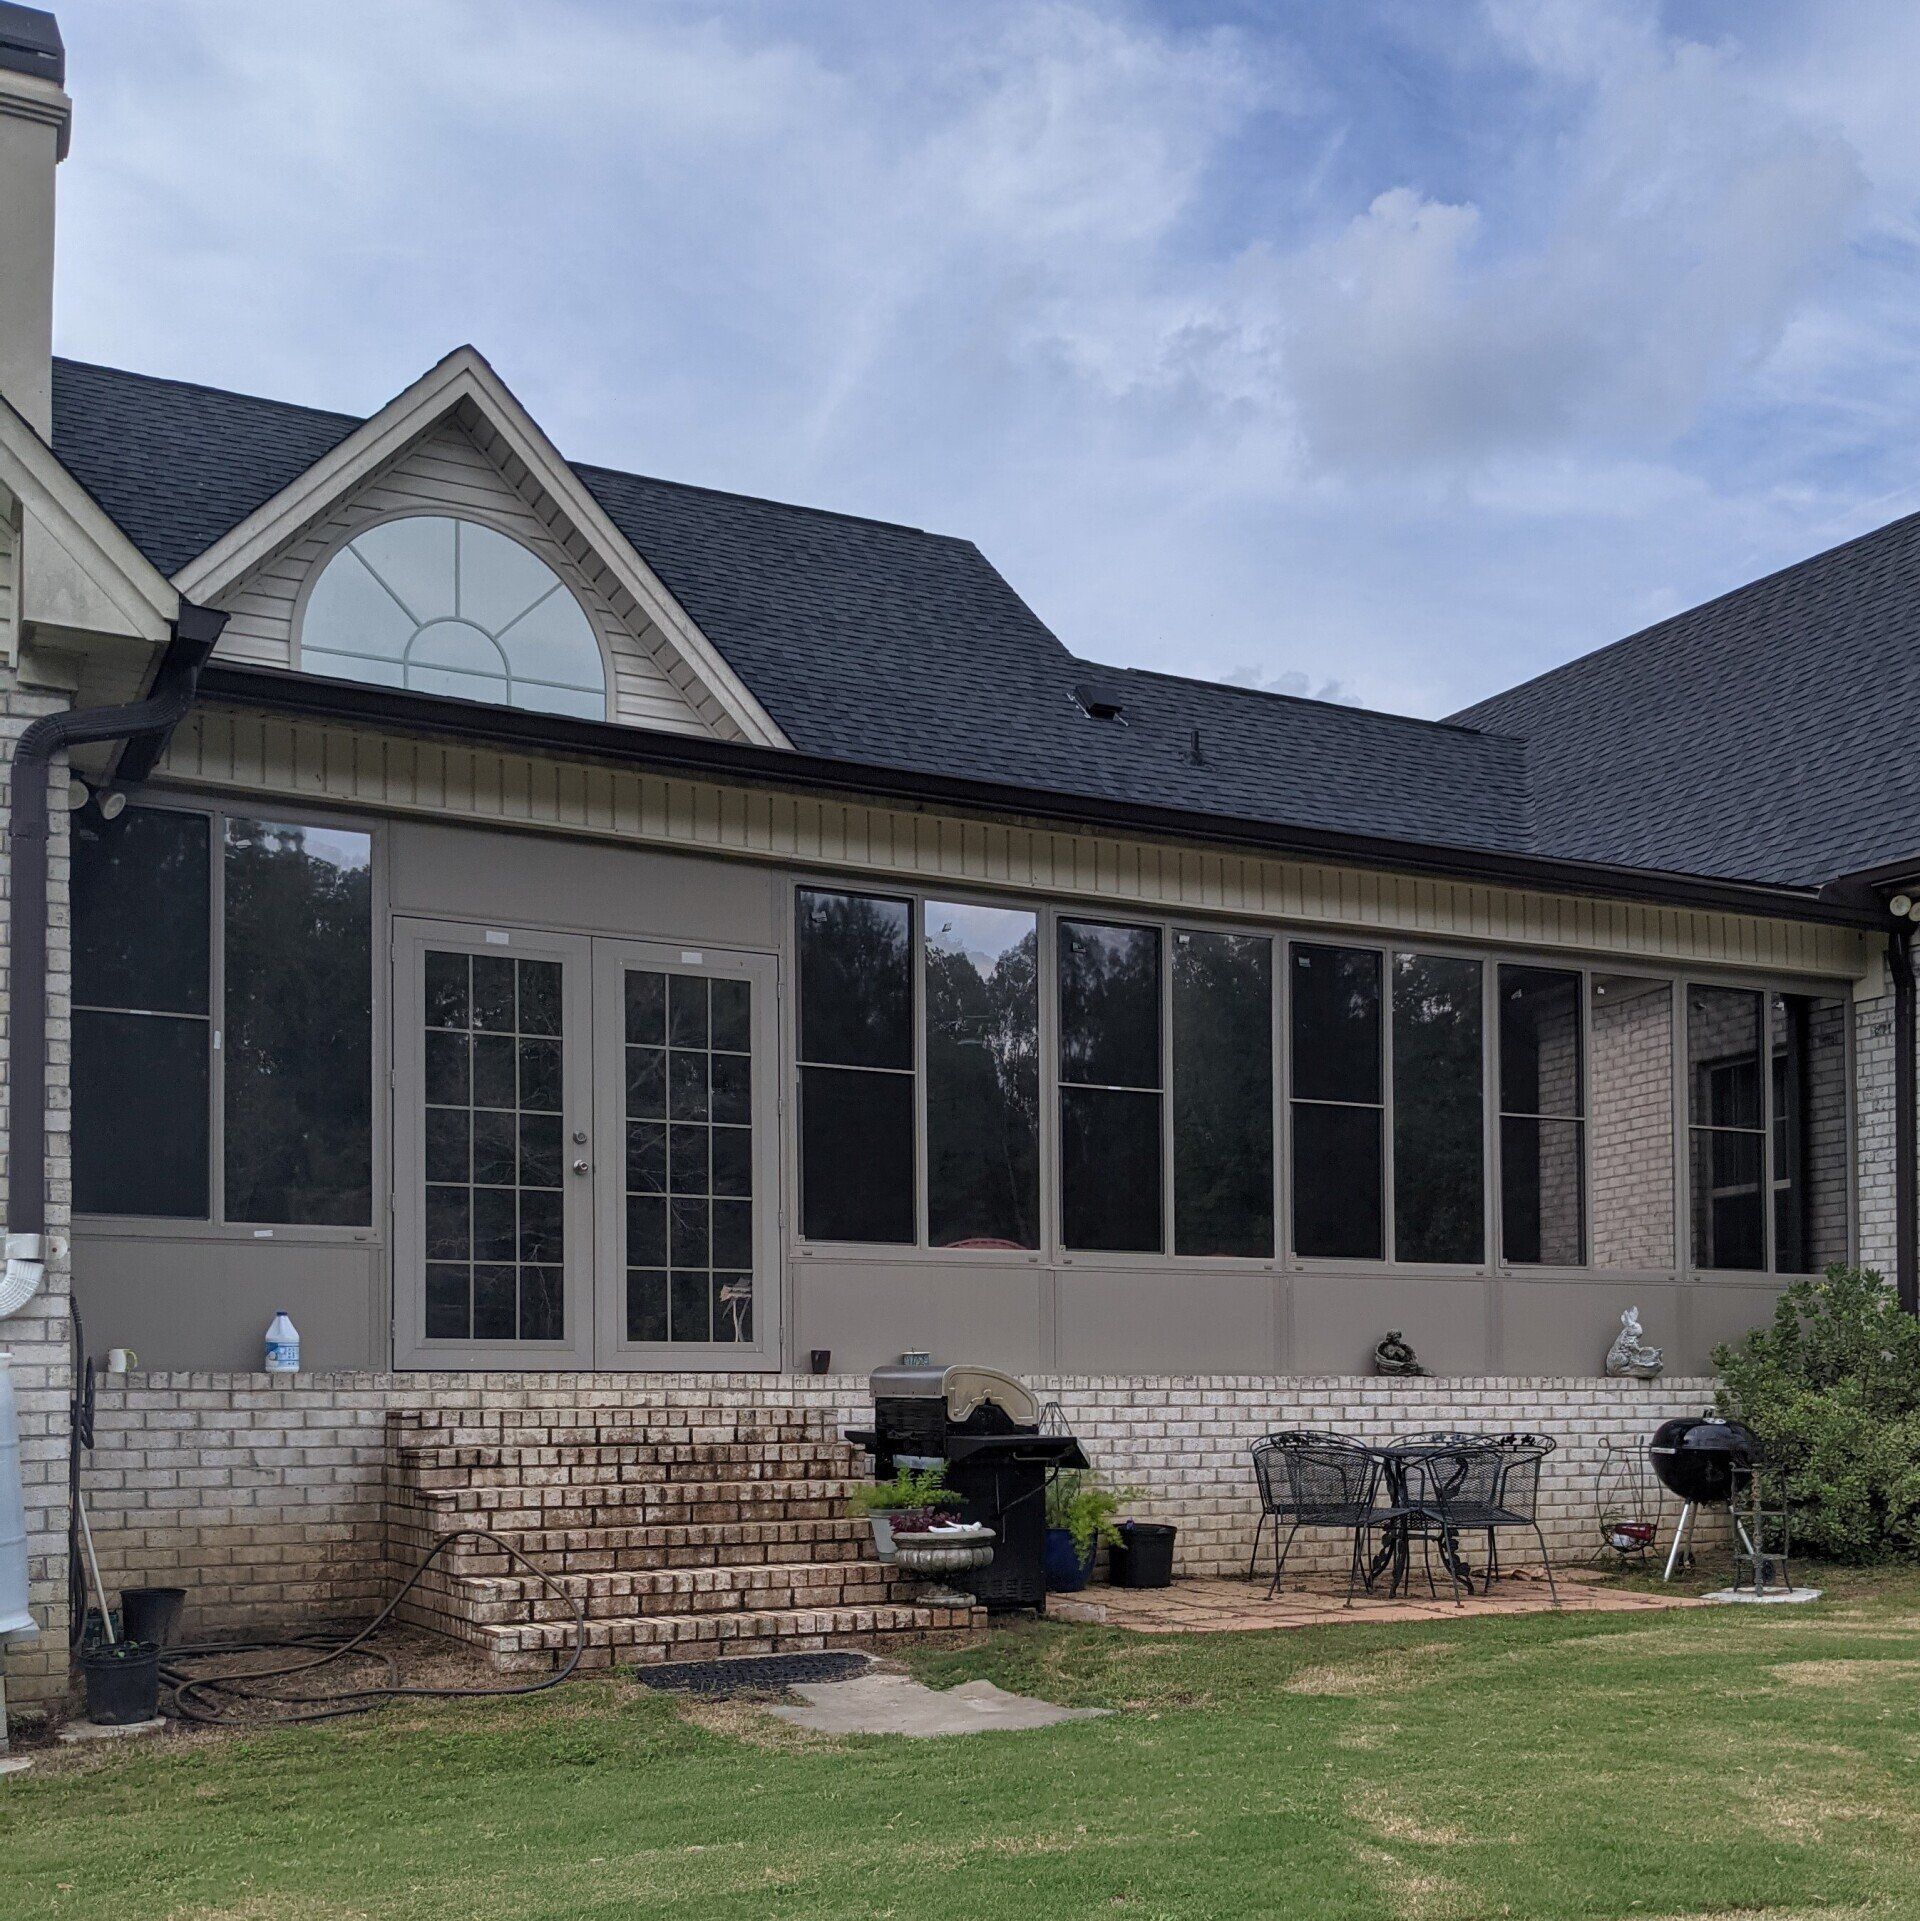 residential tinting in Wetumpka AL - The temperature gap was extreme in this home. Now maximum heat rejection and insulation upgraded by real SPF Home Tint in Wetumpka, AL